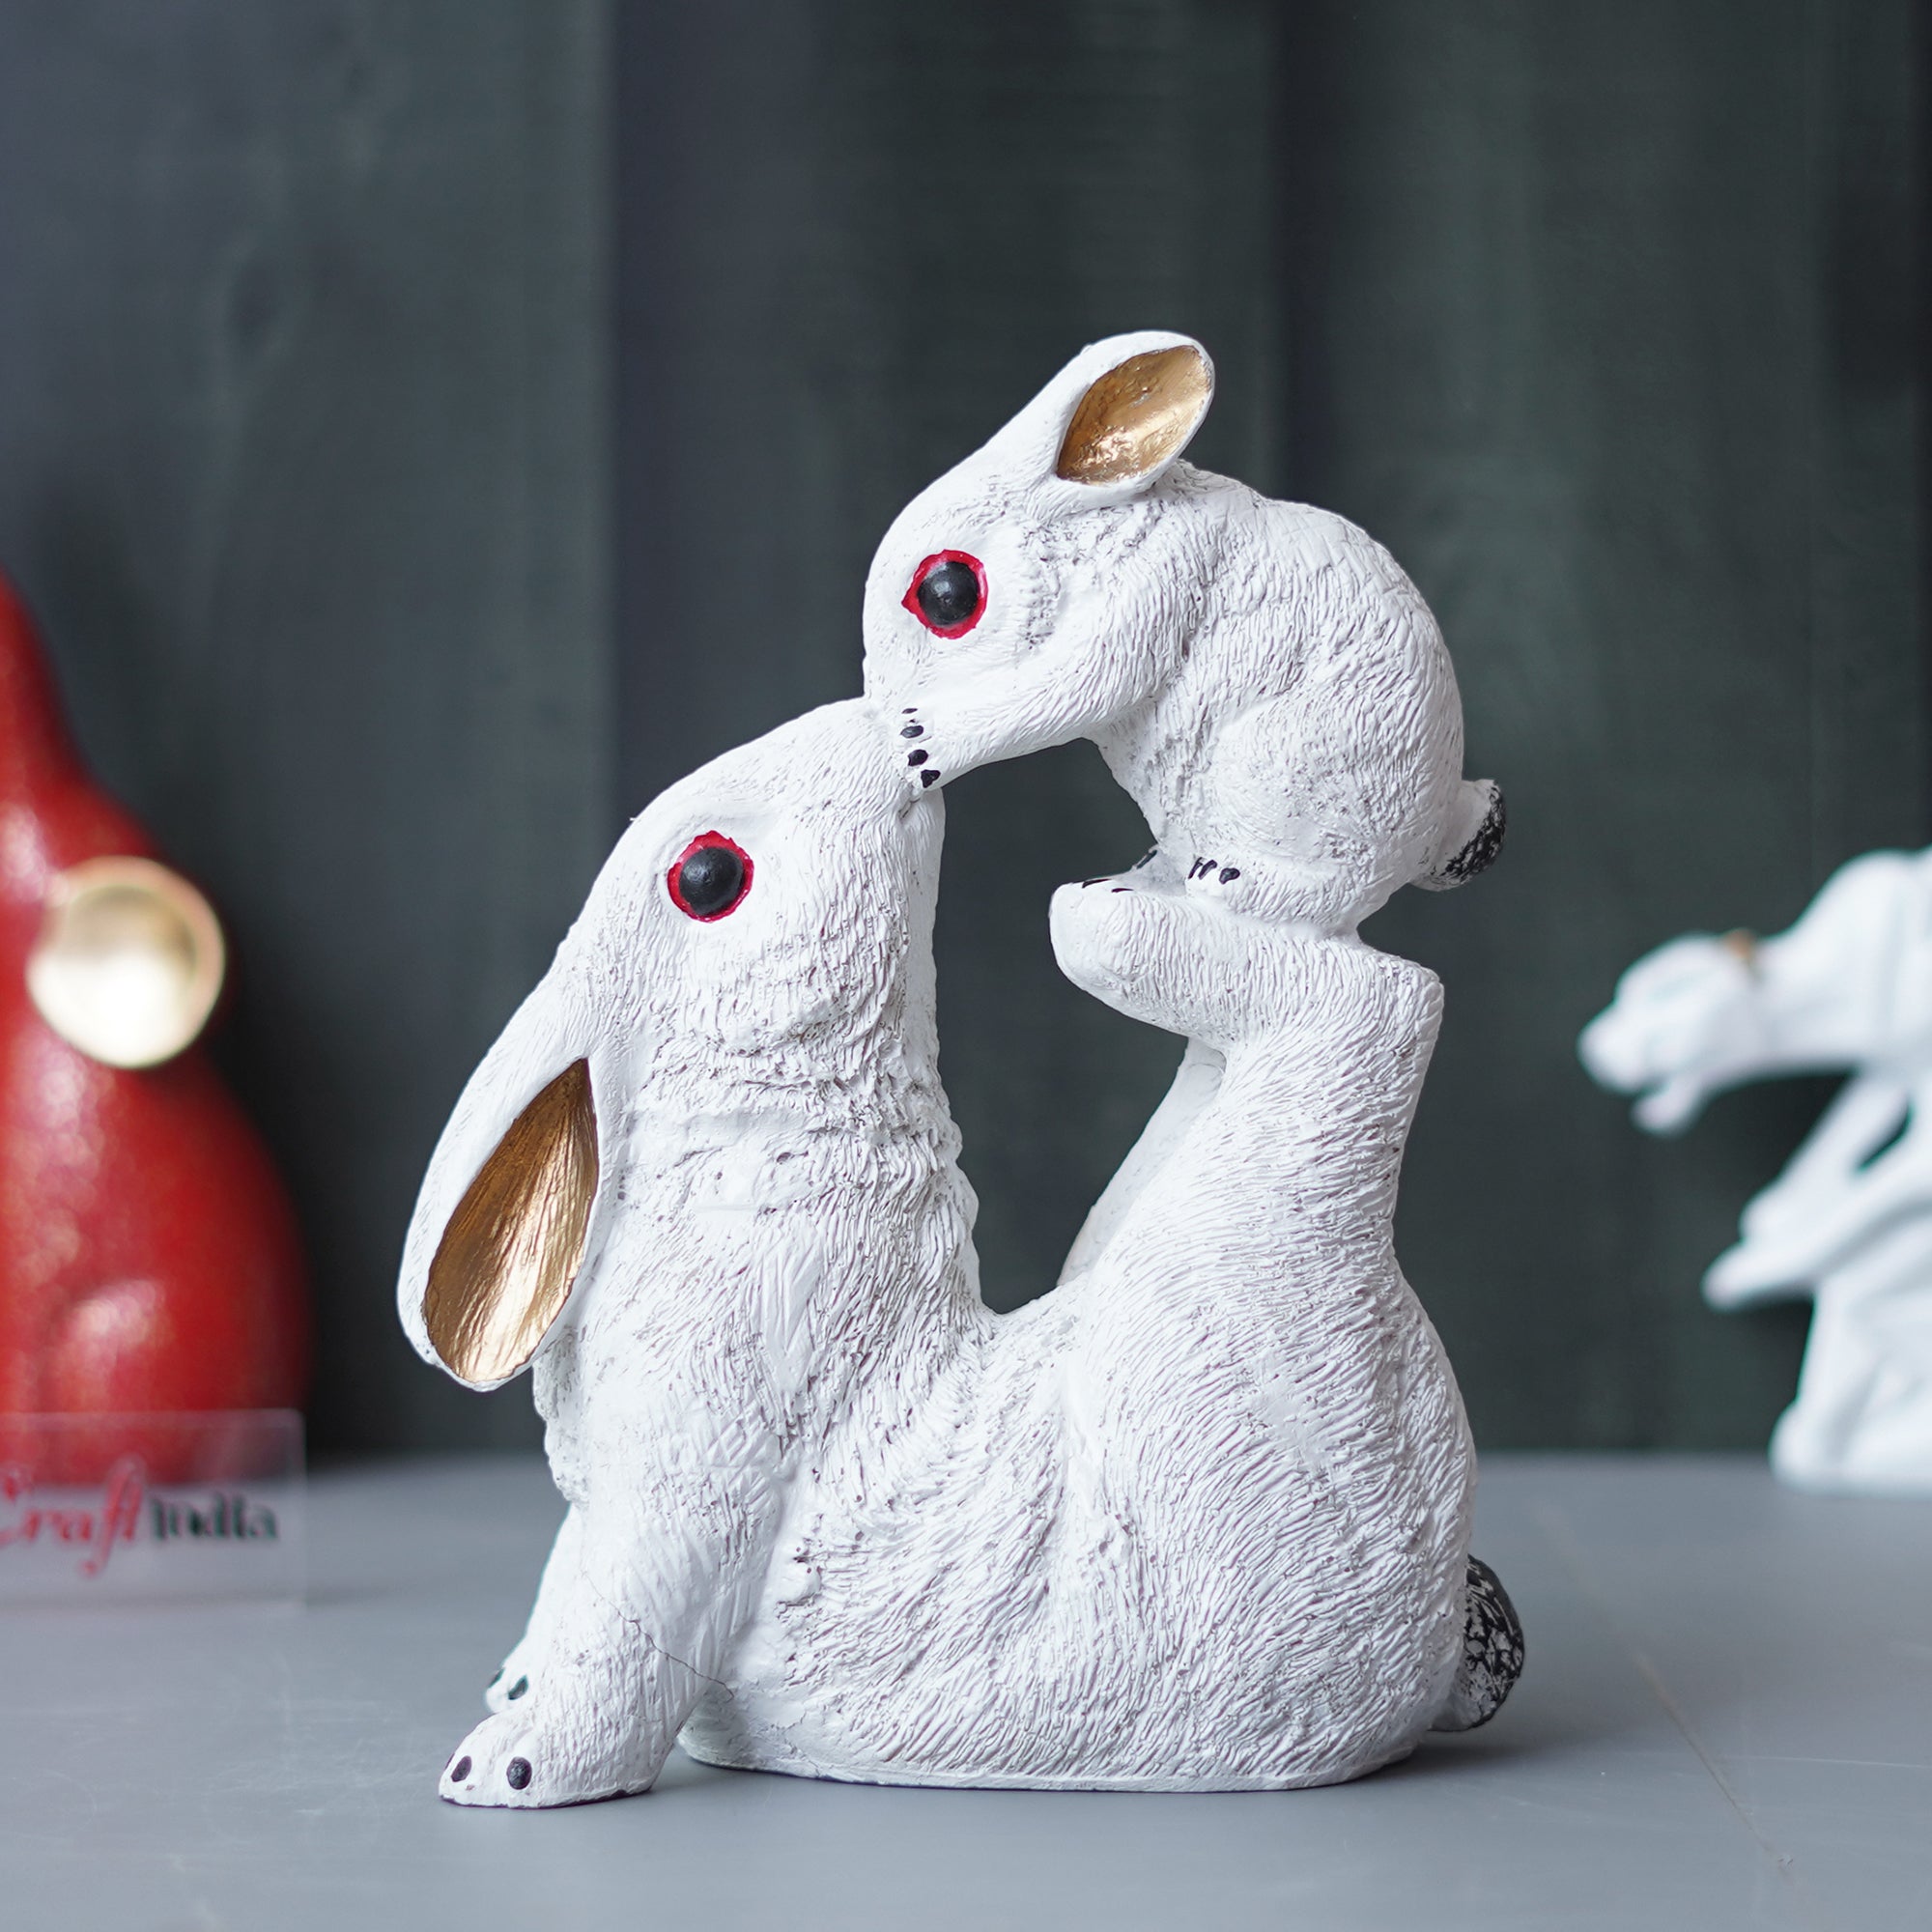 Gold and White Rabbit Statue with Bunny Animal Figurines Decorative Showpiece for Home Decor 1